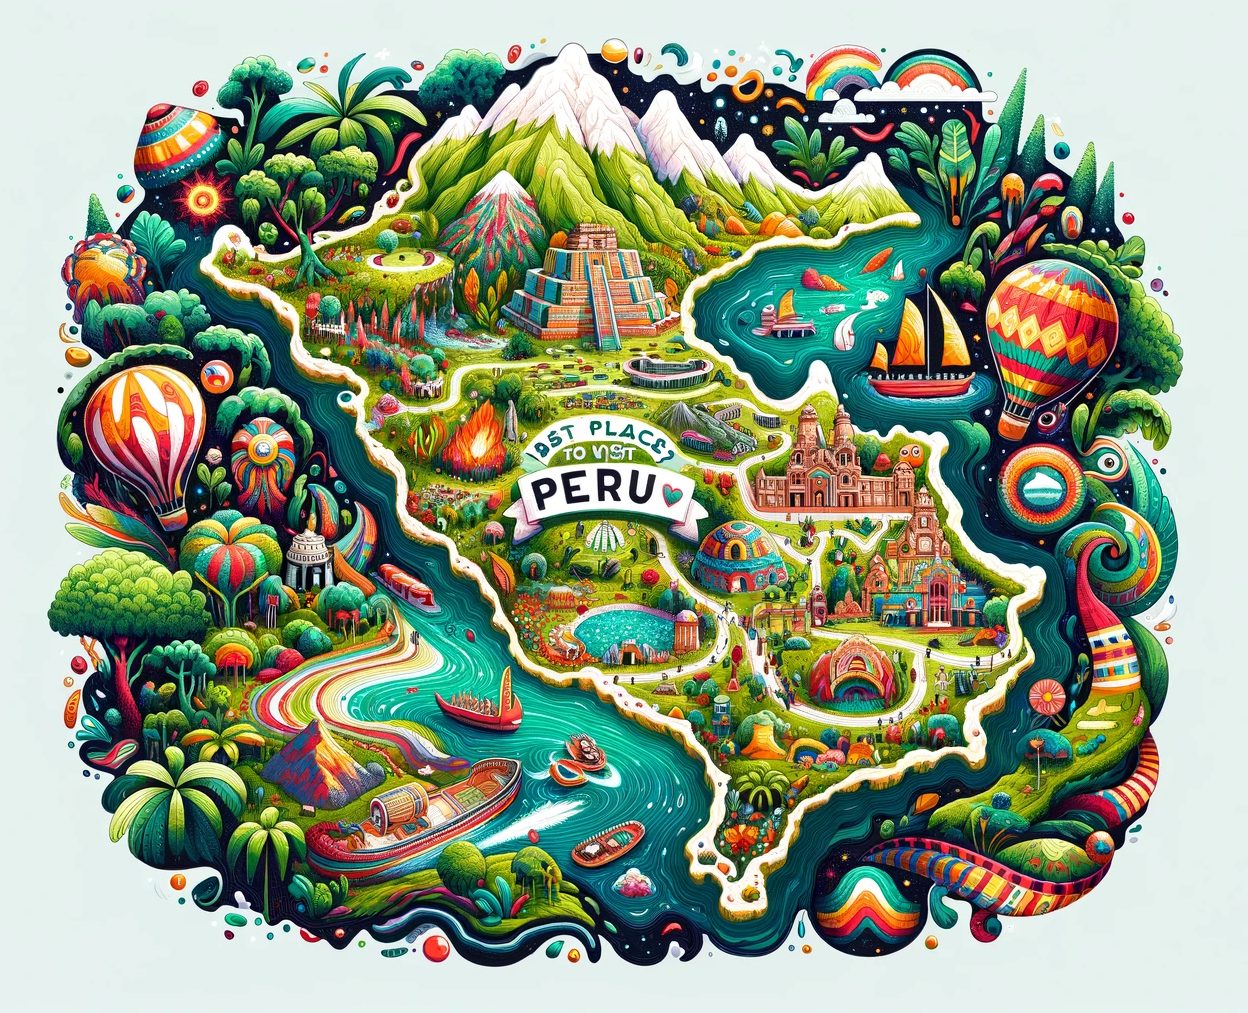 Colorful illustrated map of Peru with landmarks and nature.